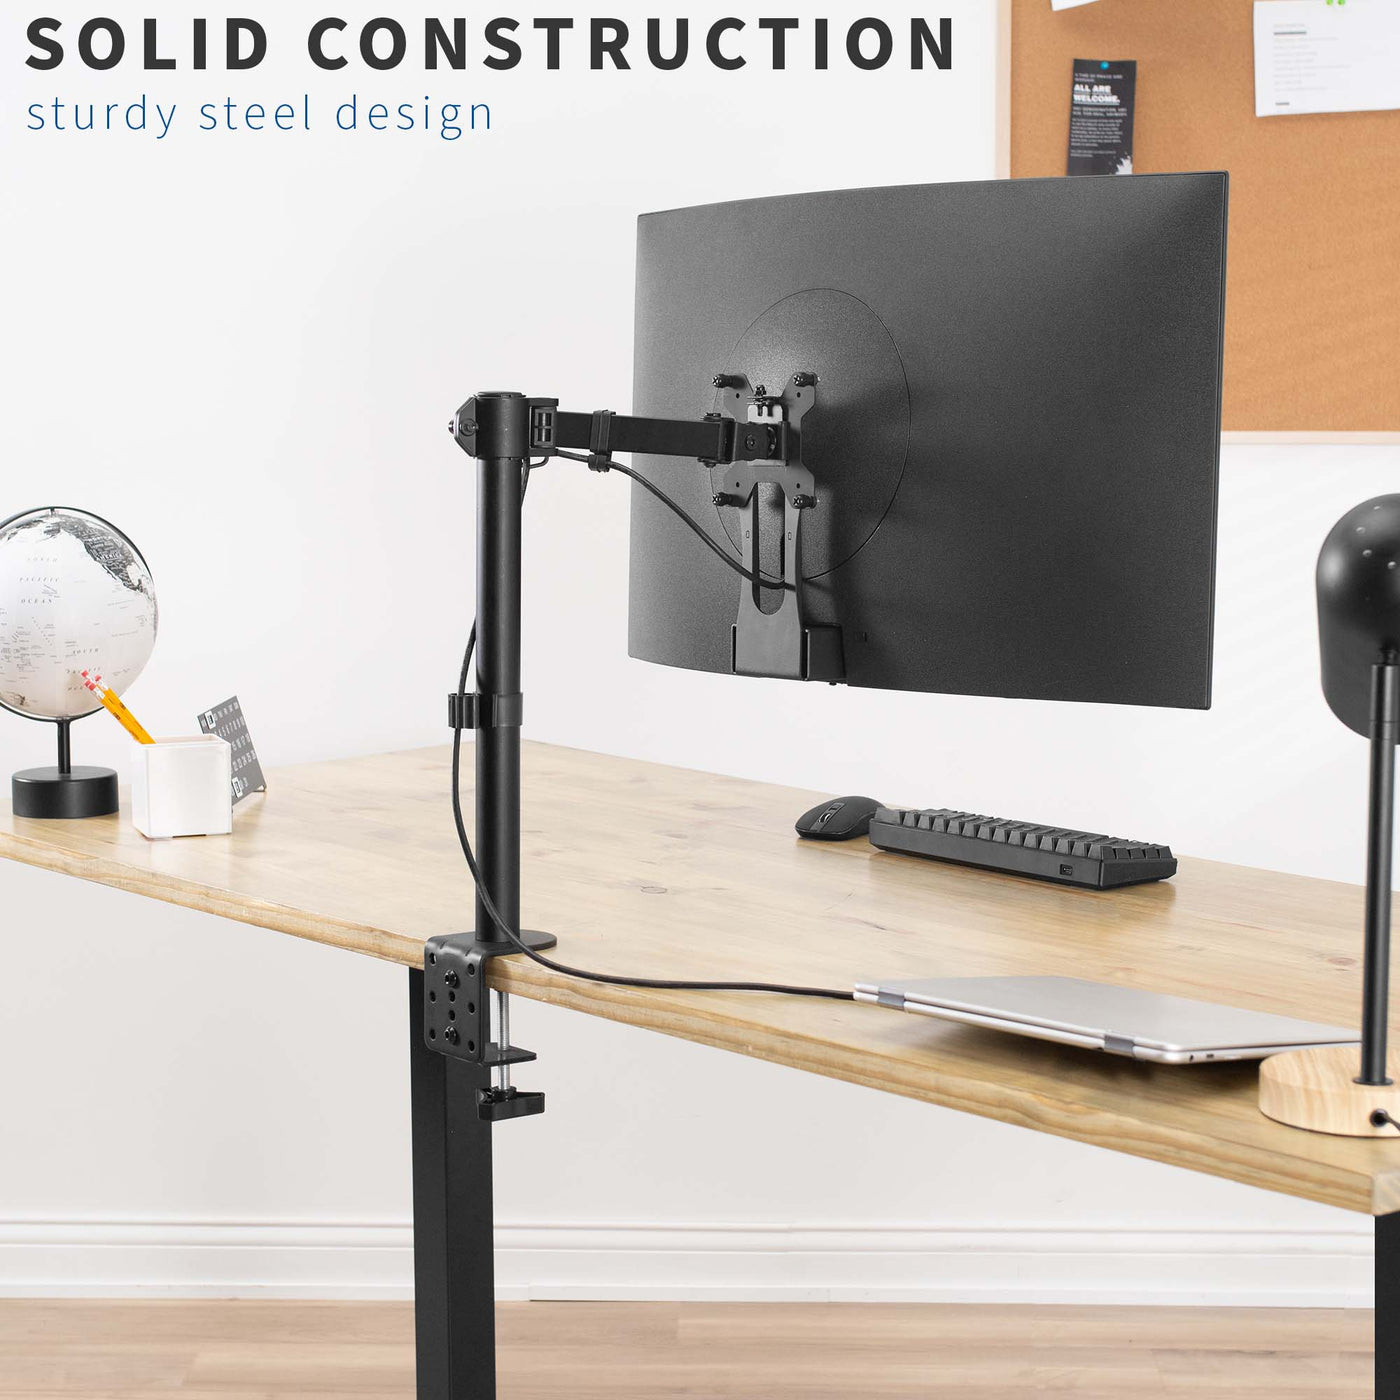 Solid construction with a sturdy steel design to provide maximum support for your monitor.